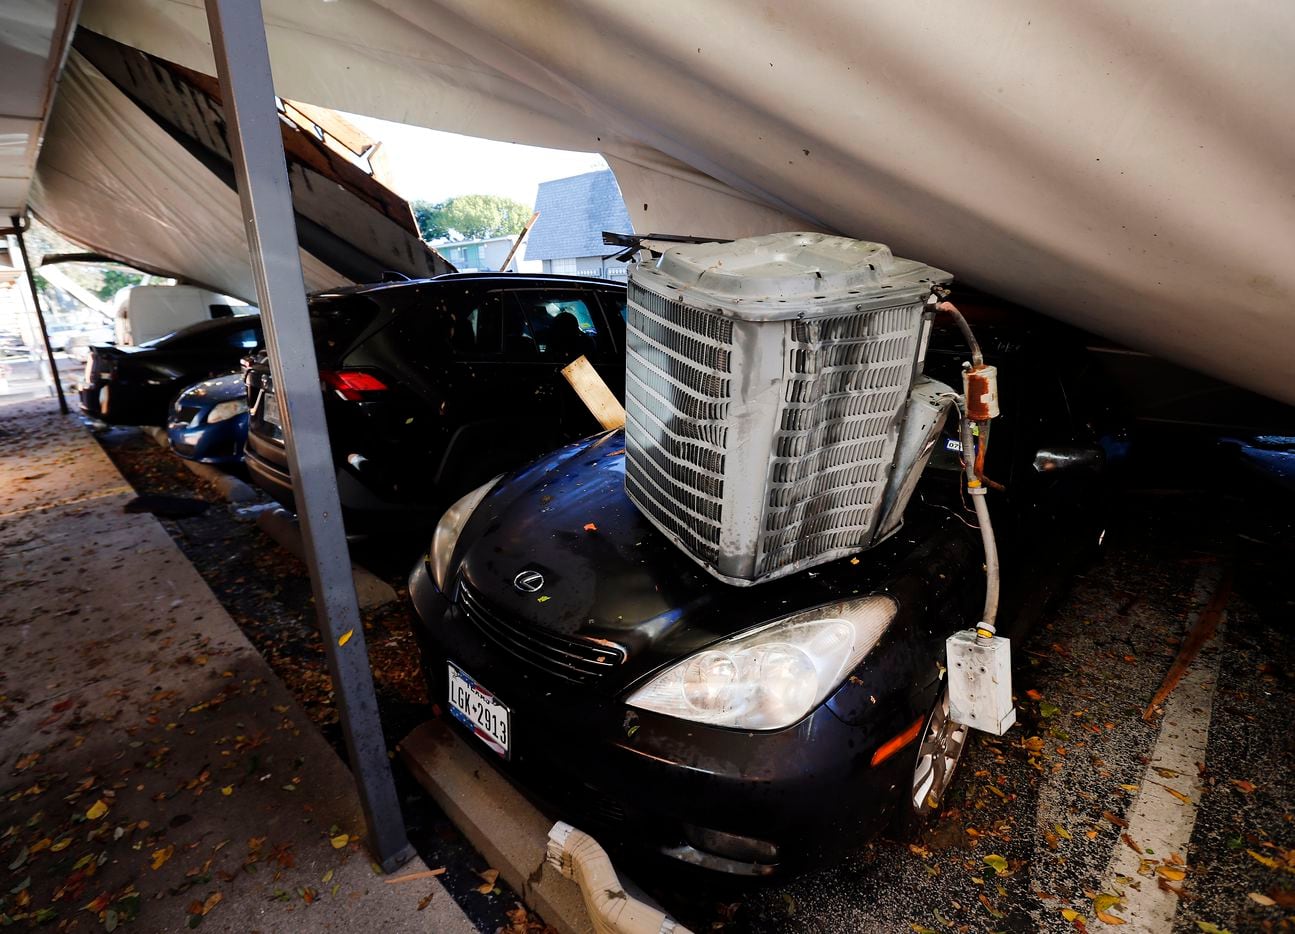 An air conditioner unit of a Waterdance Apartments building and the peeled off roof landed on a car during a tornado-warned storm that rolled through Tuesday night. Damage also occurred at The Mirage Apartments along Pioneer Parkway in Arlington, Wednesday, November 24, 2020.